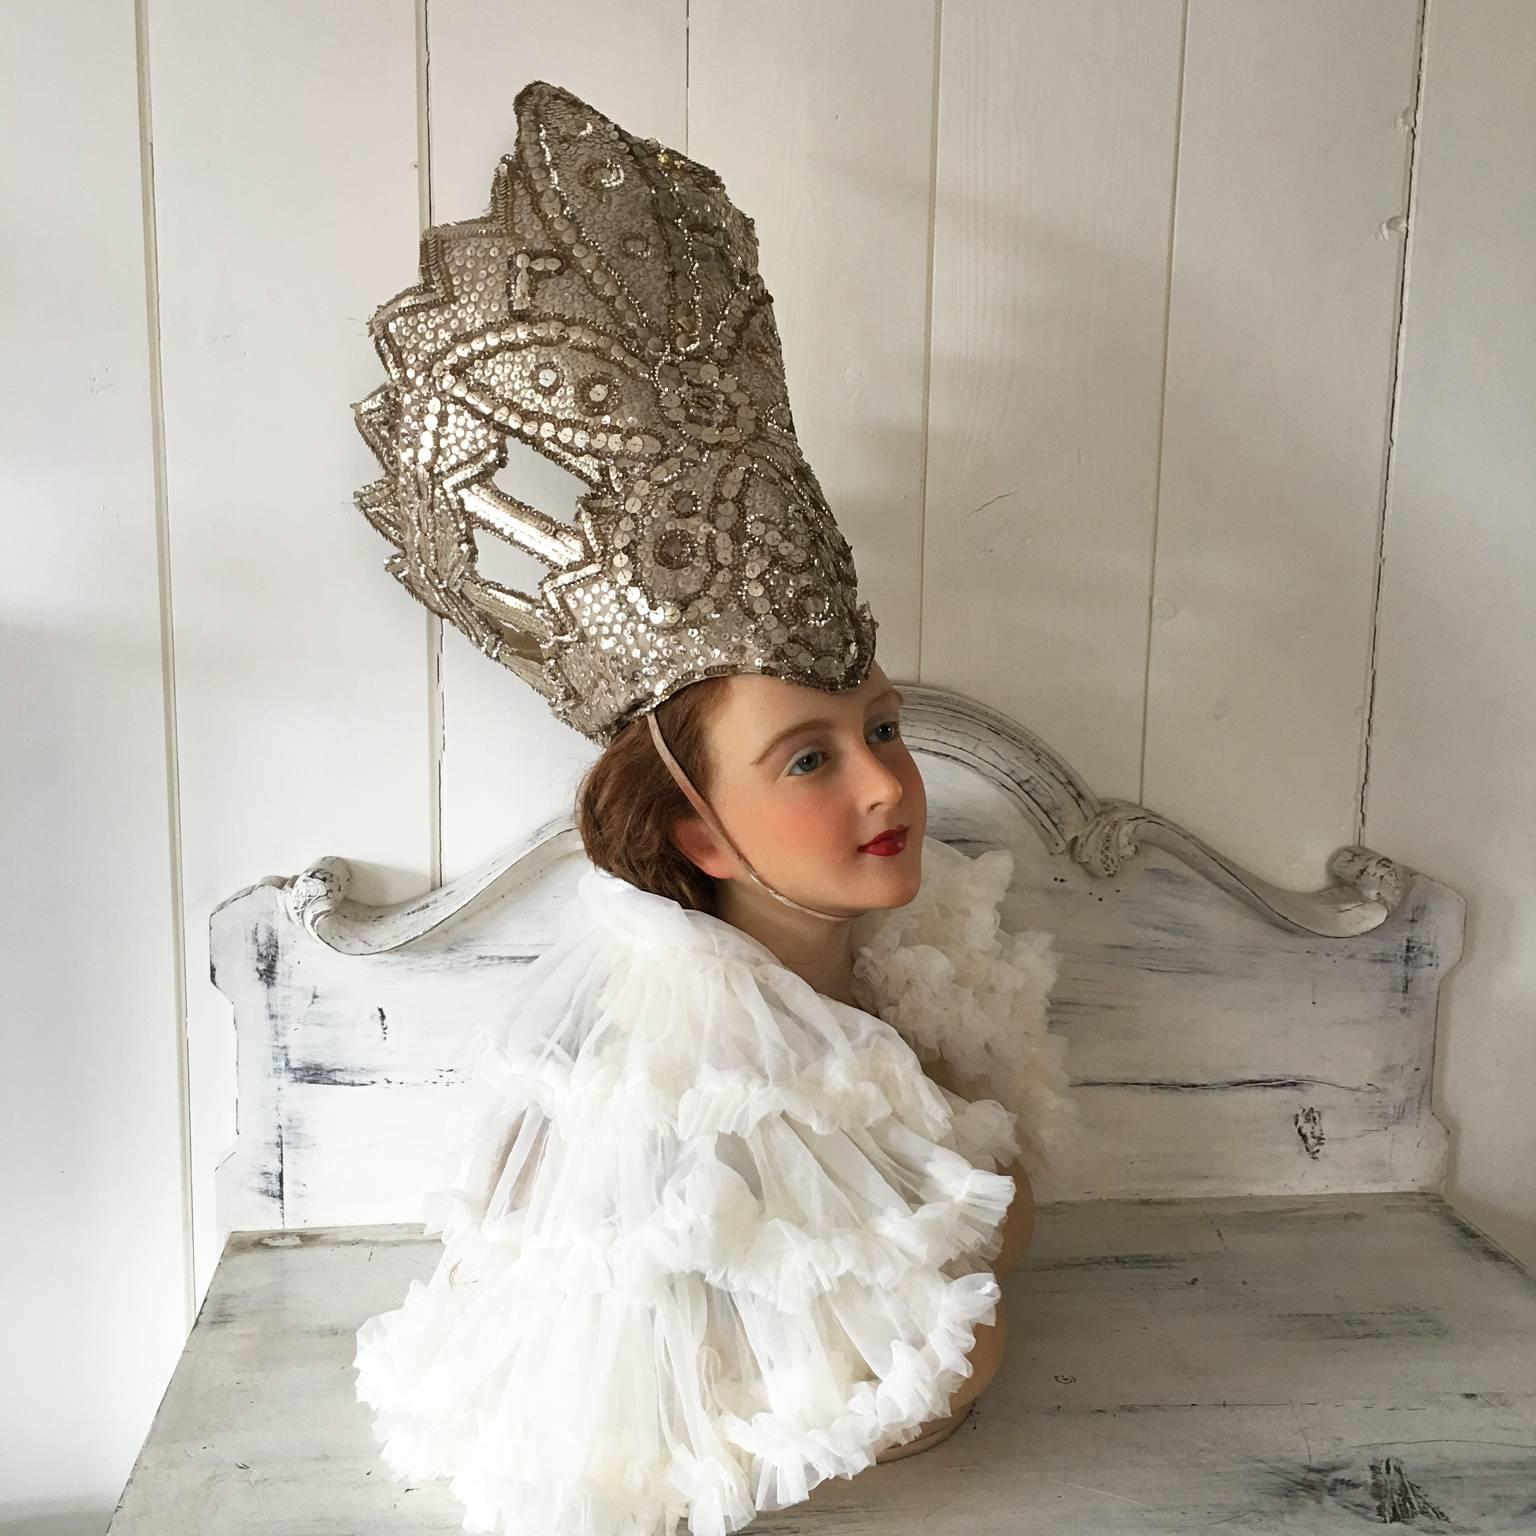 A beautiful vintage stage headdress from the 1950s, once used in a theatre's play or performance. The beautiful shaped headdress is fully handmade out of a re-inforced fabric and hundreds of different sized gold colored sequins embroidered by hand